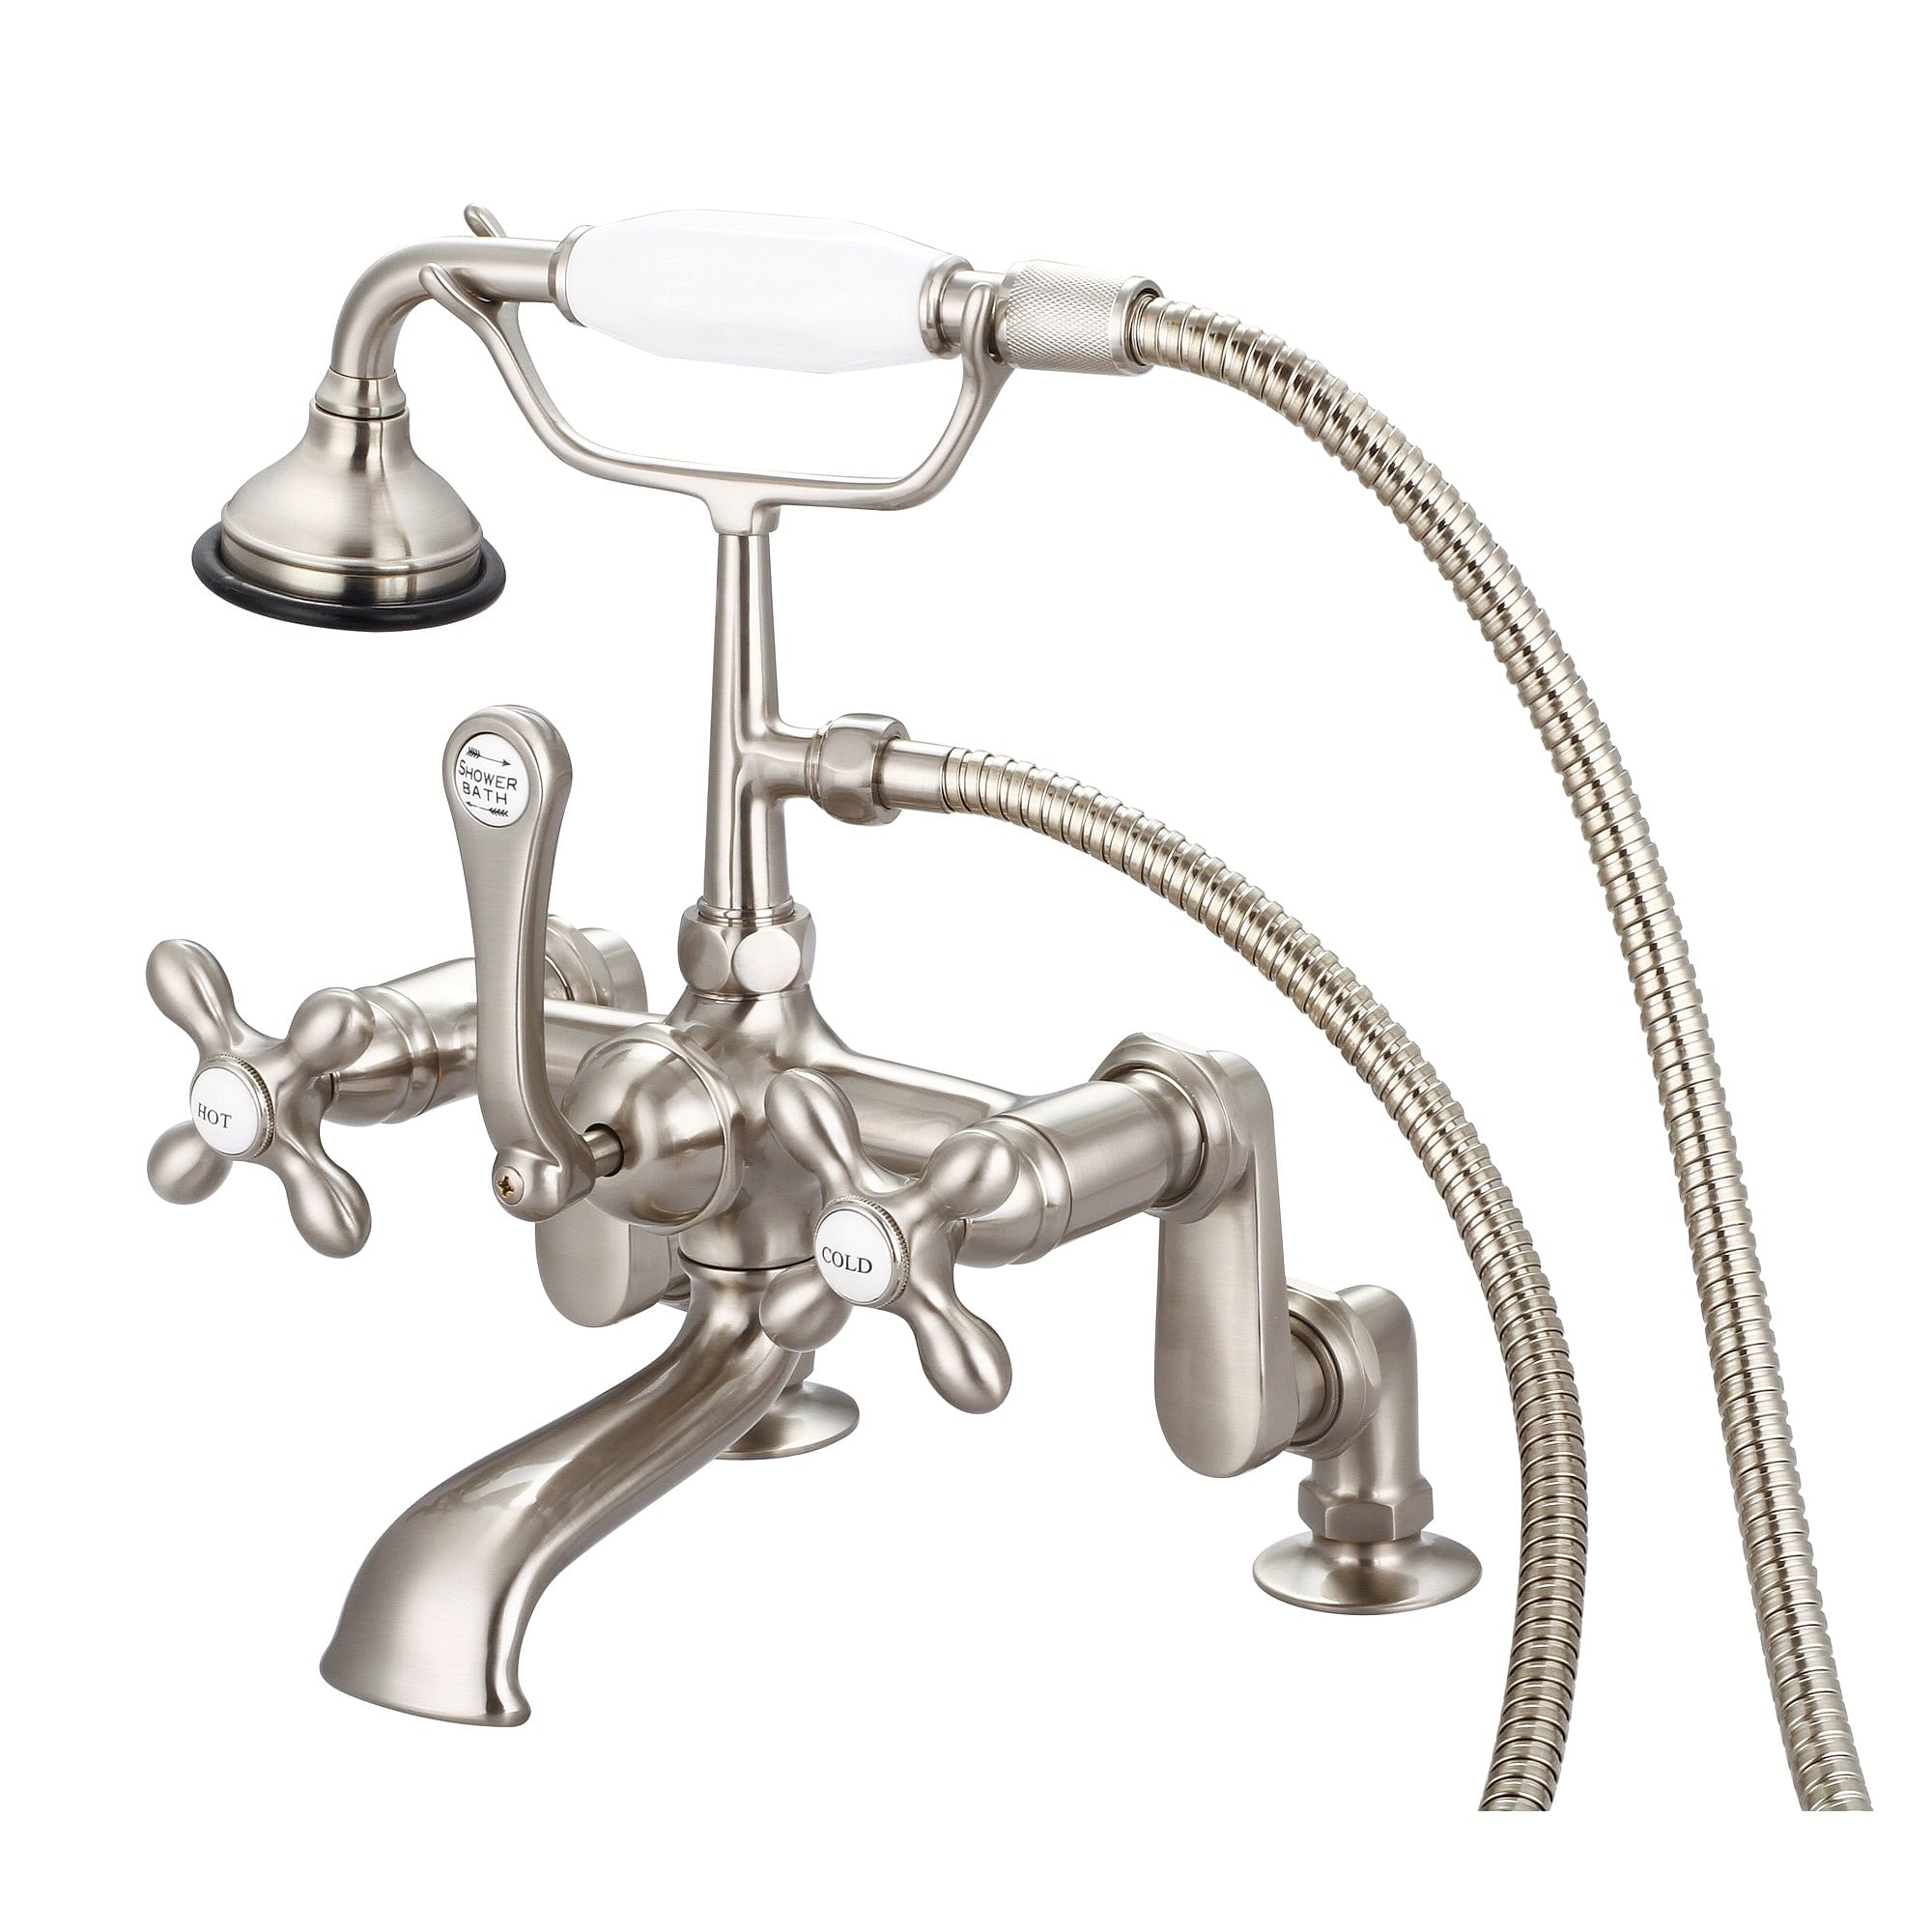 Vintage Classic Adjustable Center Deck Mount Tub Faucet With Handheld Shower in Brushed Nickel Finish With Metal Lever Handles, Hot And Cold Labels Included